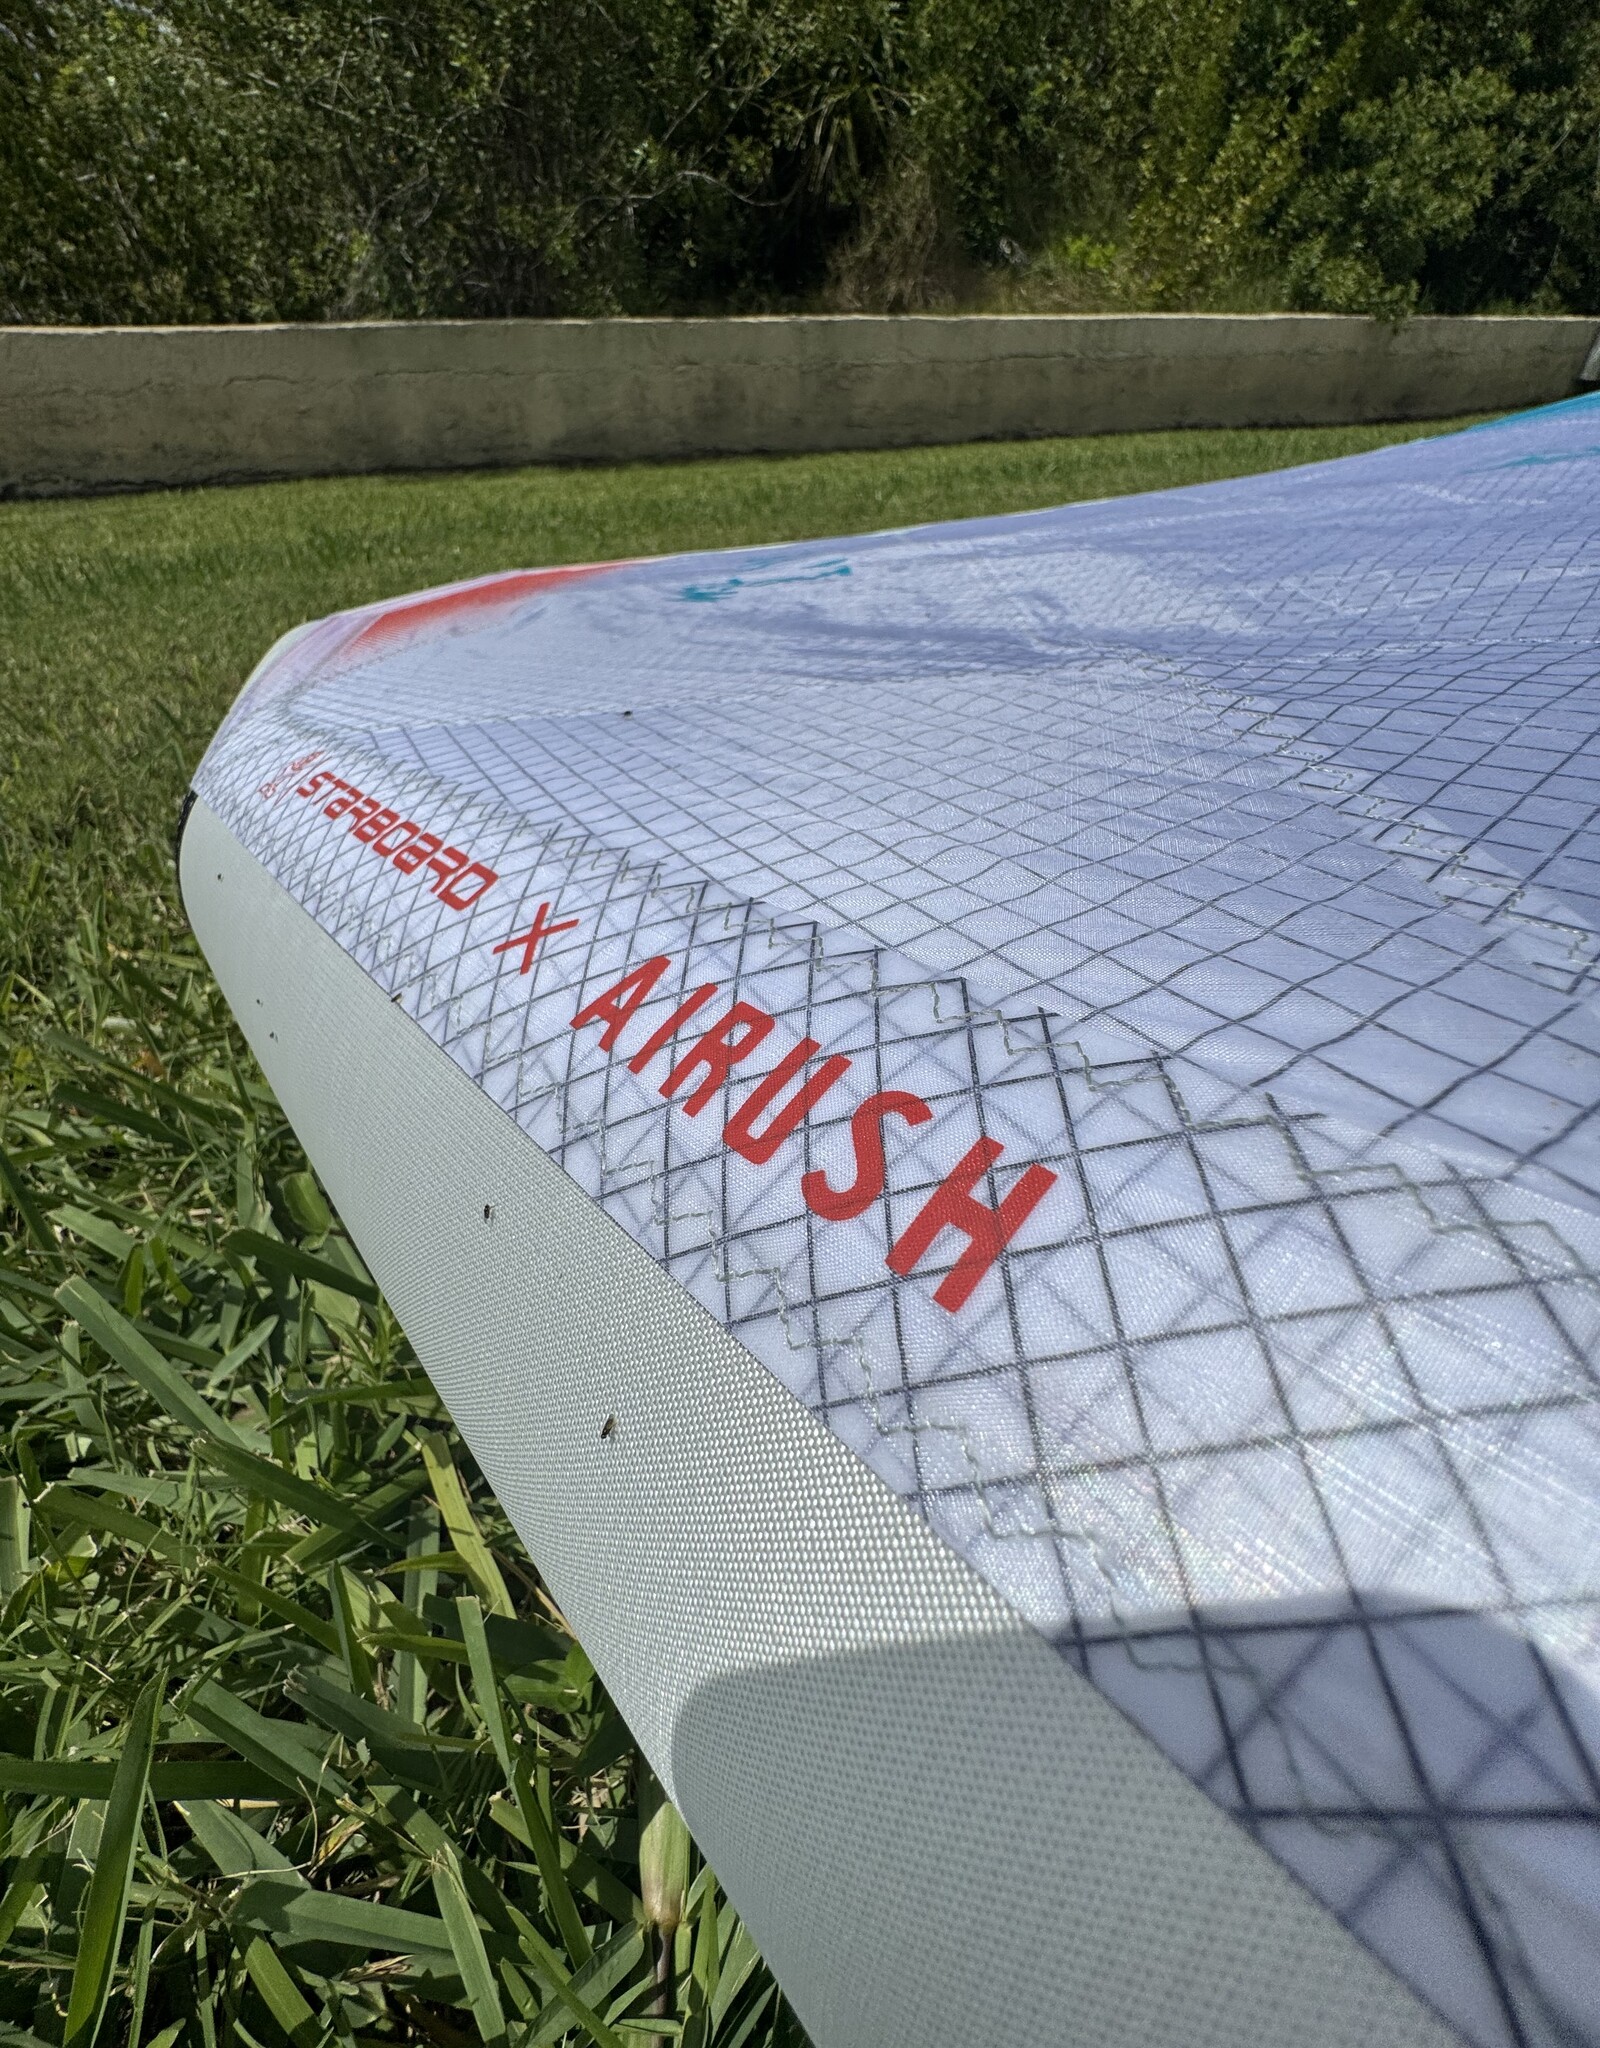 FREEWING FREEWING AIR TEAM 3M ULTRA X CANOPY AND HO'OKIPA AIRFRAME